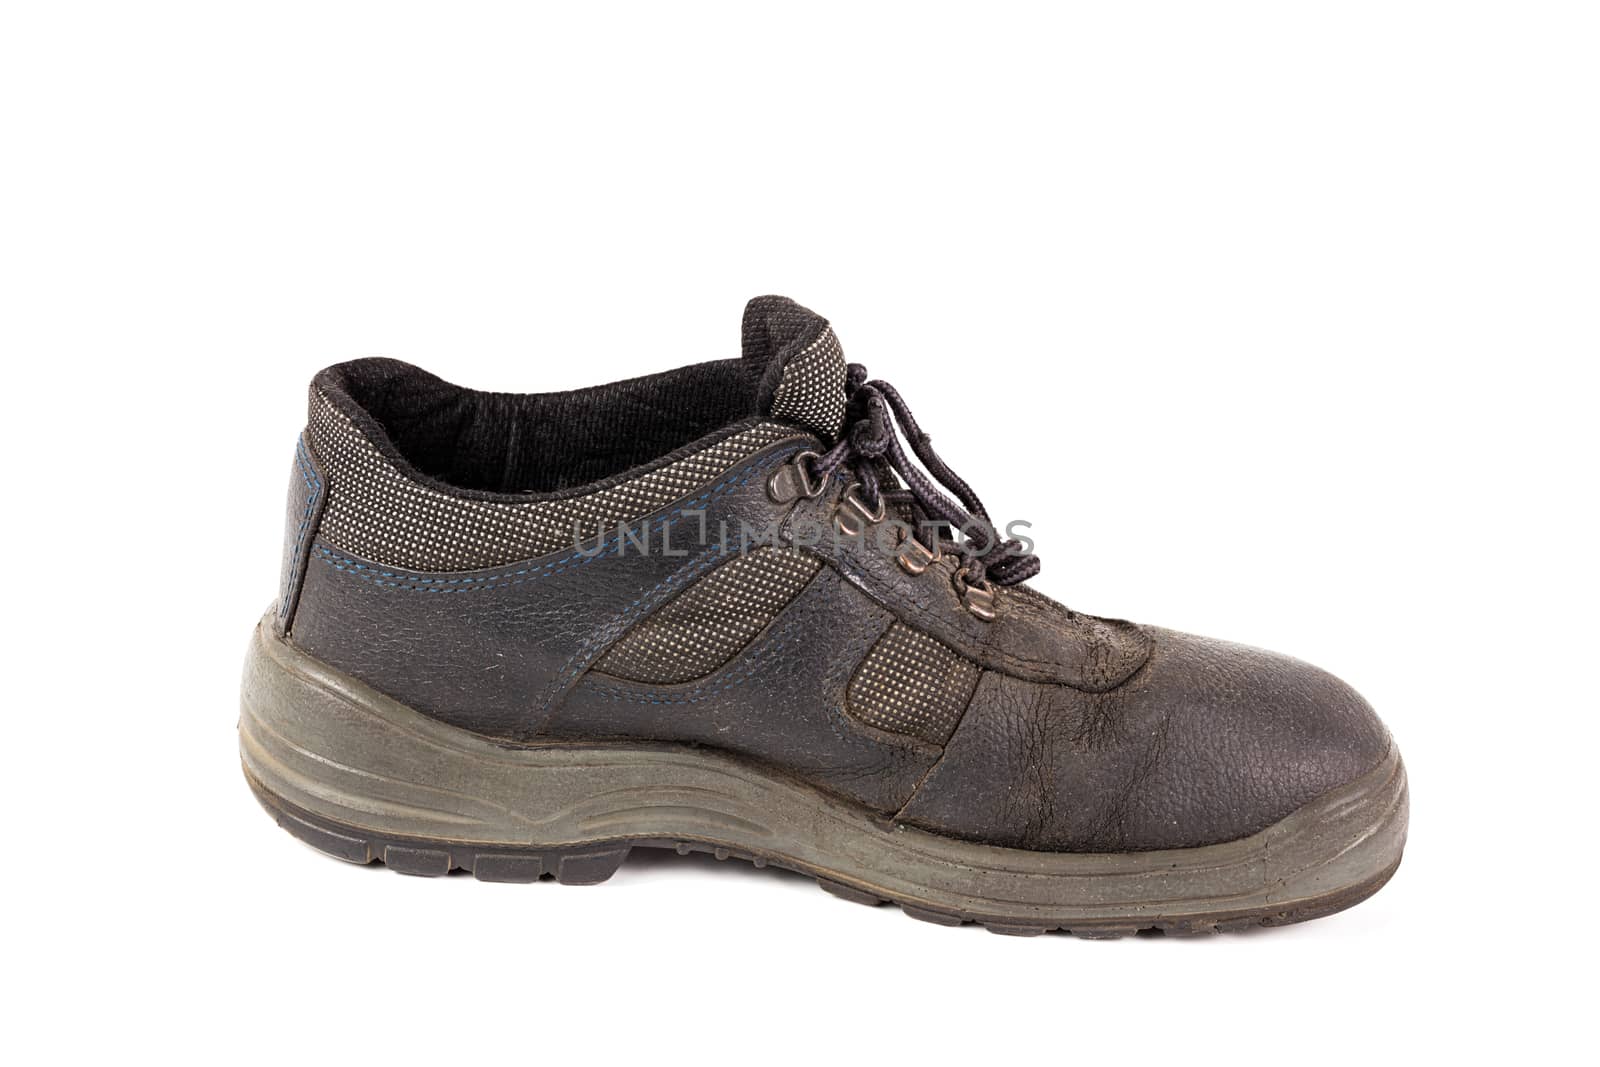 One used blue leather work shoe with fabric incuts isolated on white background.